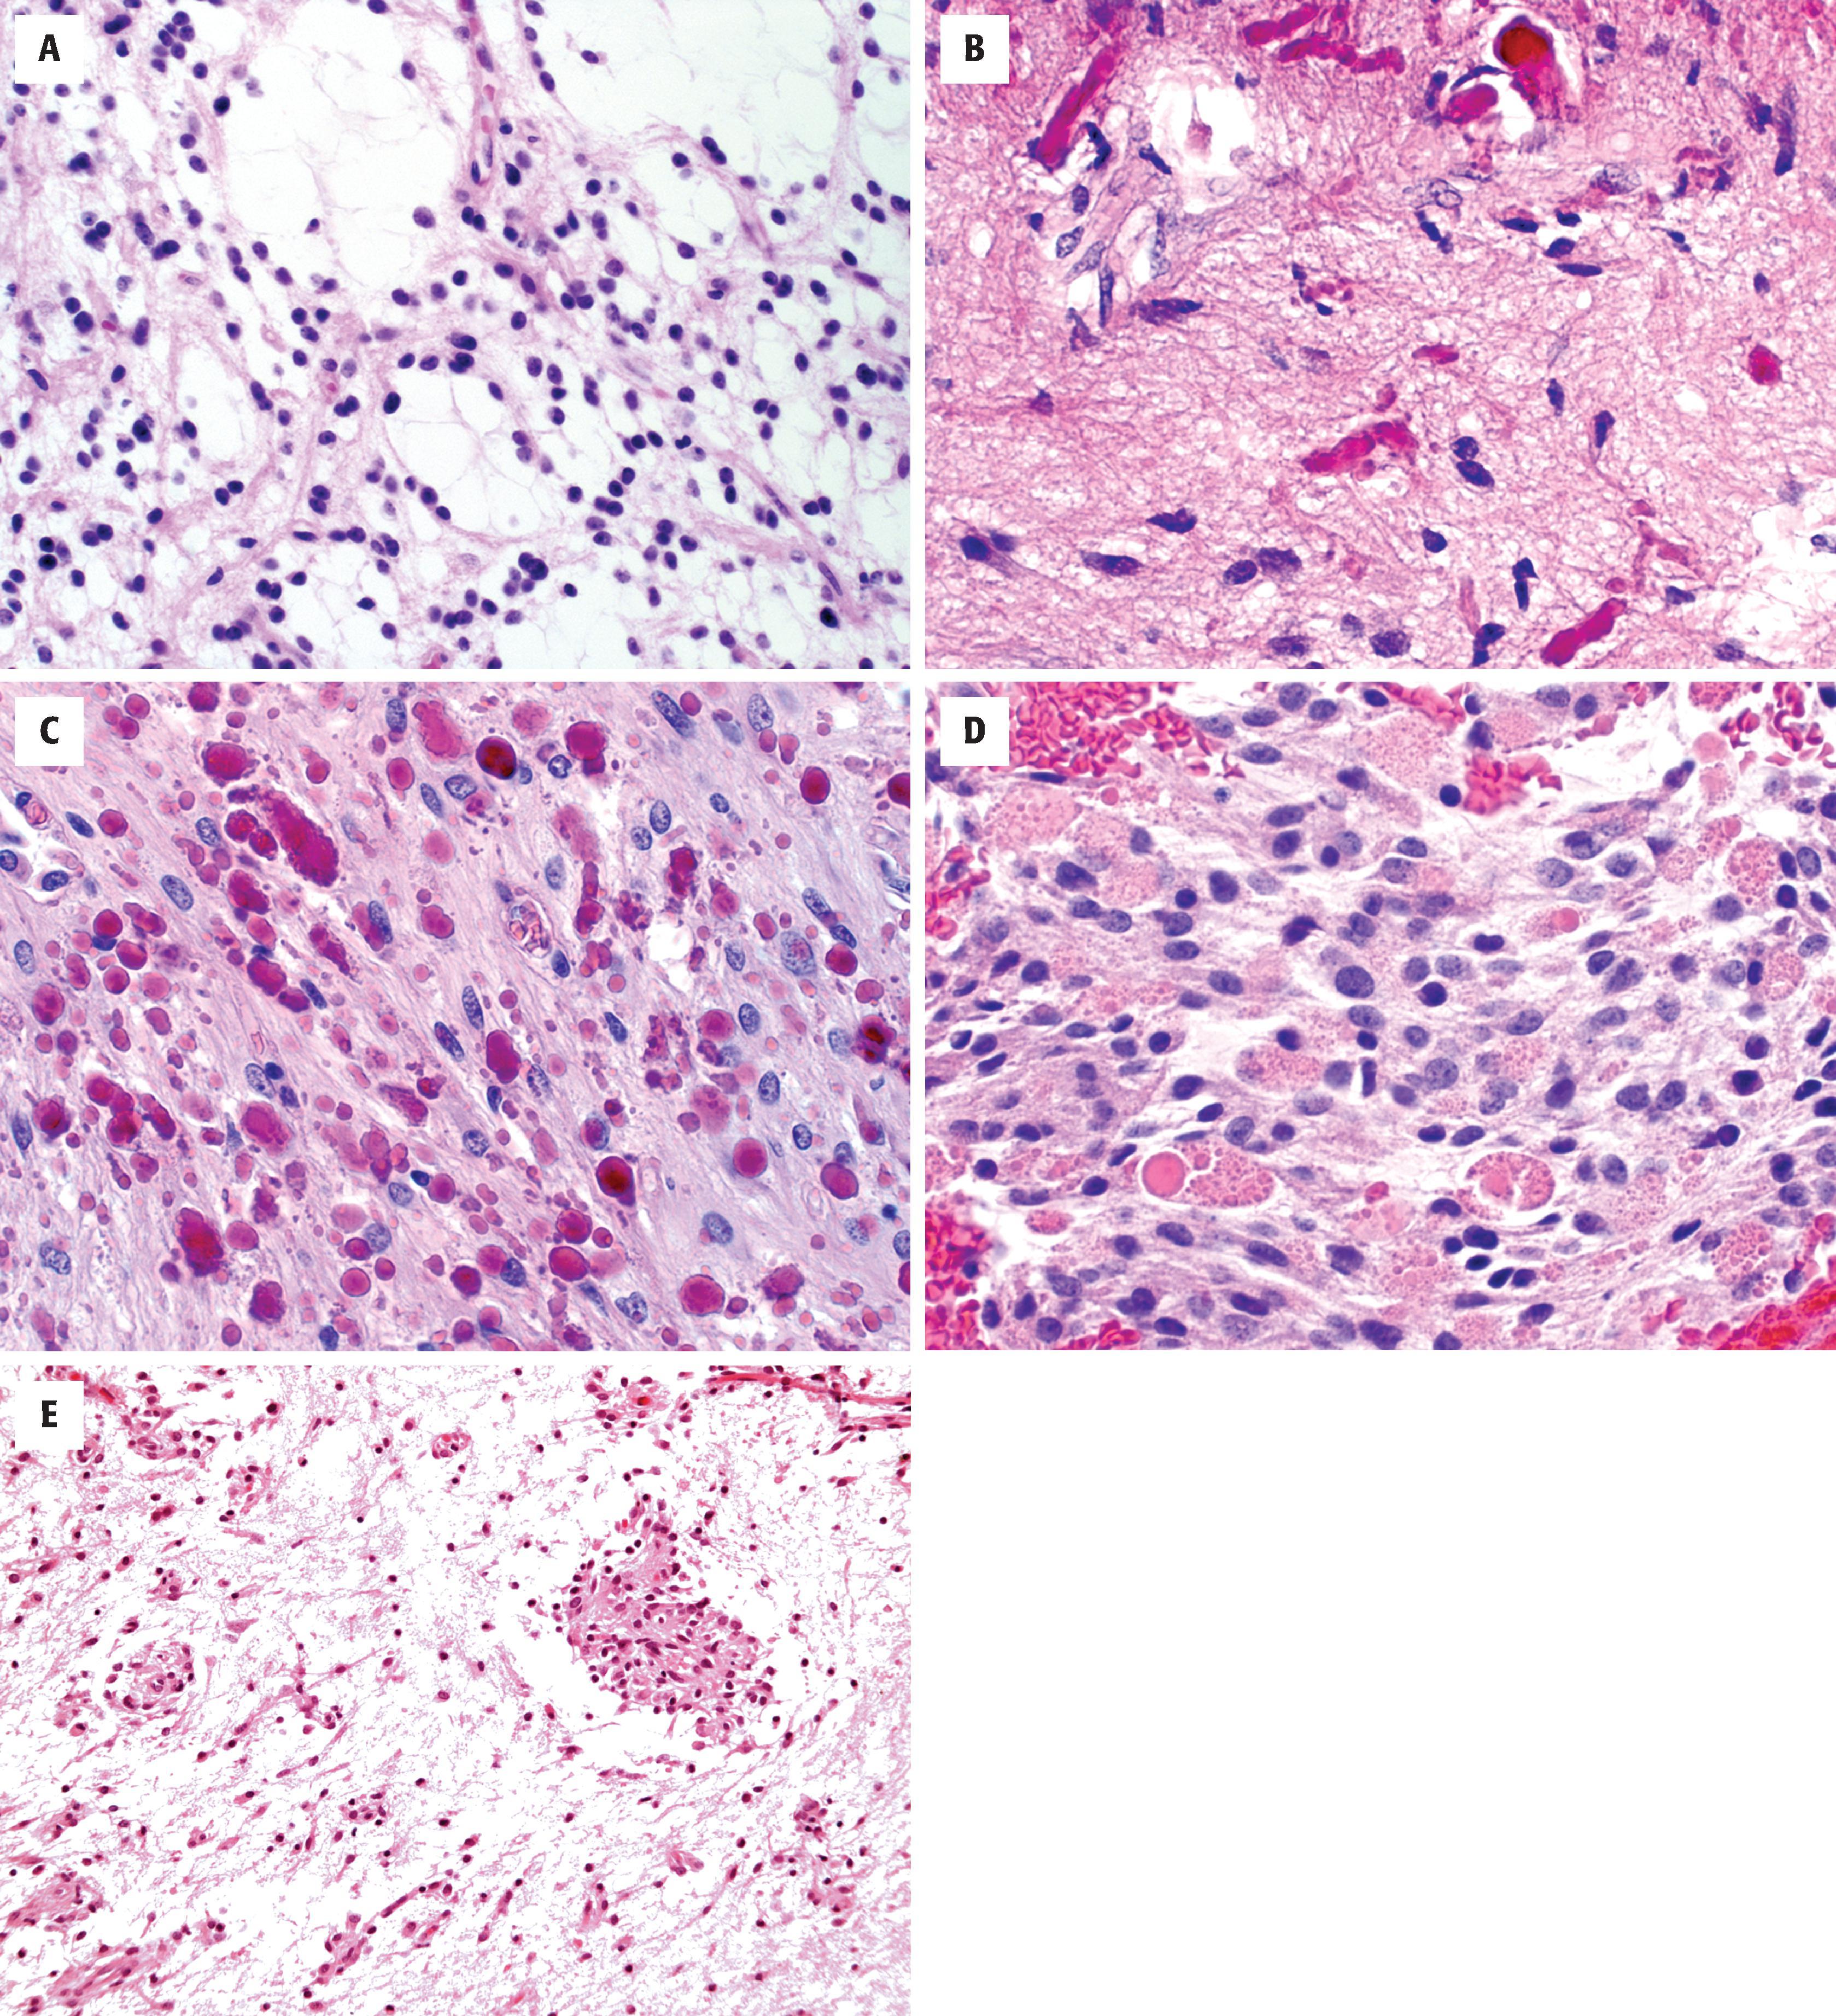 FIGURE 9.8, Pilocytic astrocytomas with spindled astrocytes containing long, thin processes; loose microcystic foci ( A ); dense foci with Rosenthal fibers ( B , C ), and abundant eosinophilic granular bodies ( D ). Pilomyxoid astrocytoma ( E ) with a perivascular arrangement of tumor cells.